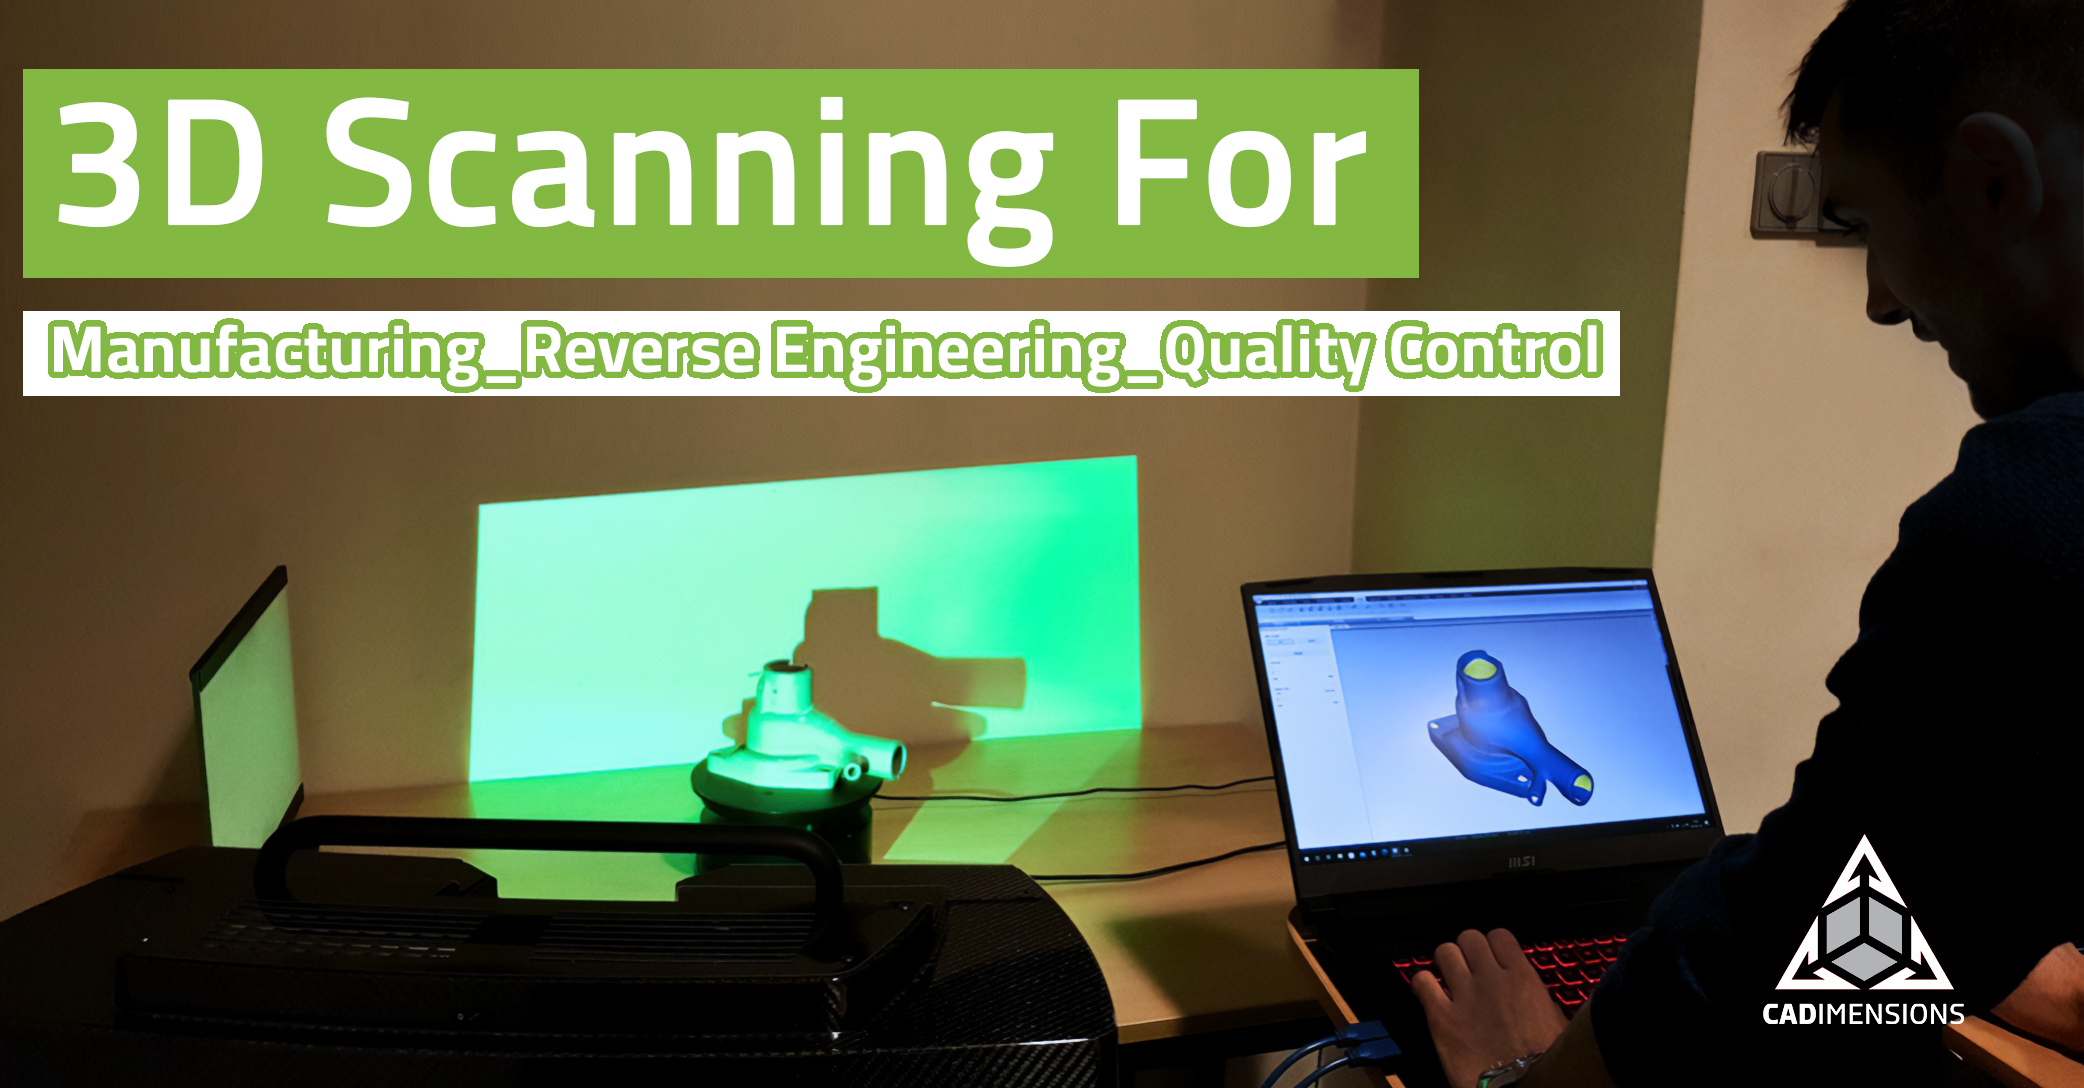 Benefits Of 3D Scanning For Manufacturing Reverse Engineering Quality Control